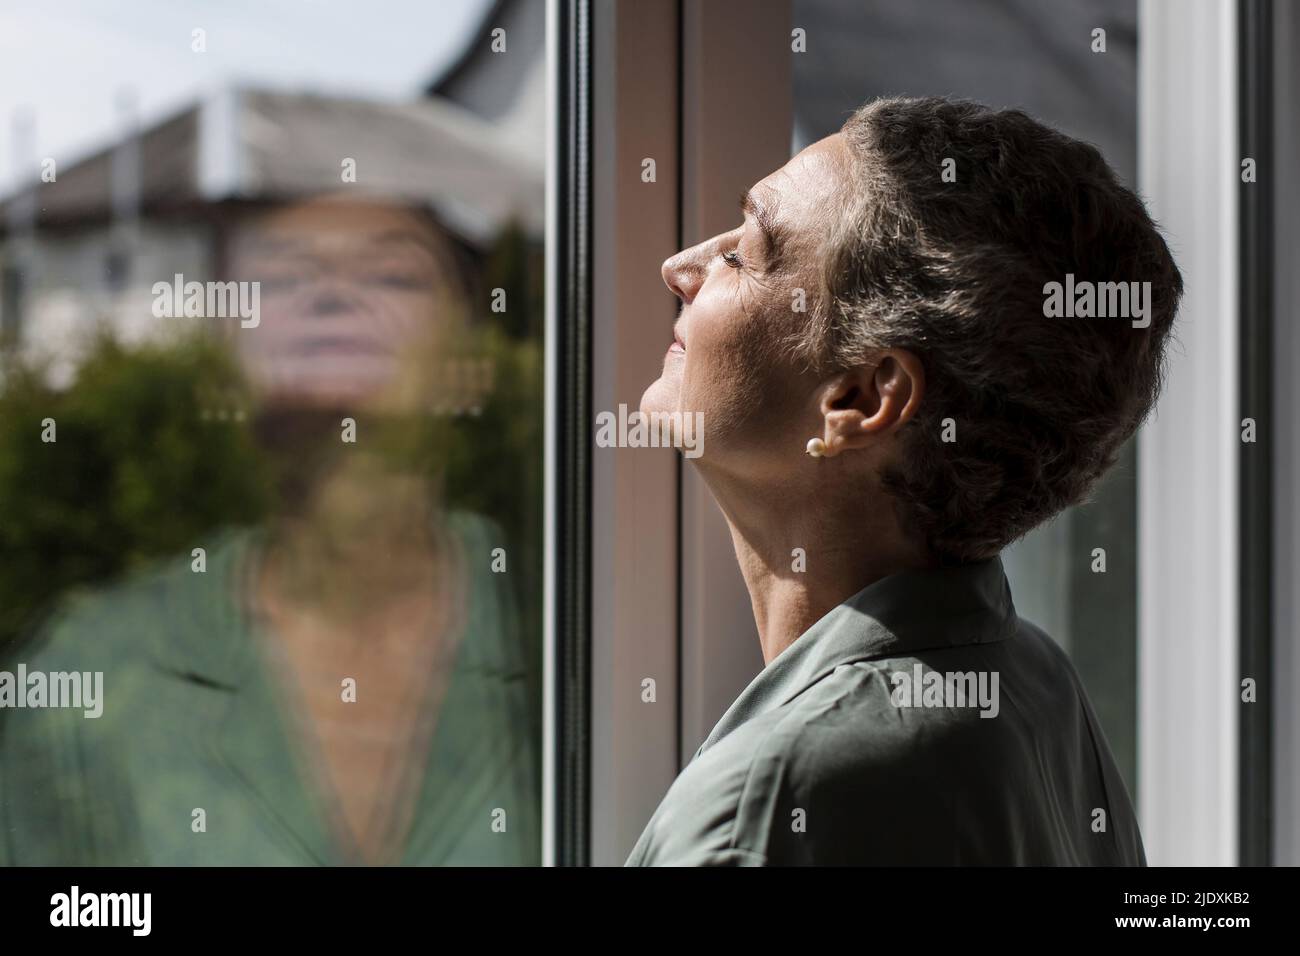 Mature woman with short grey hair at the window Stock Photo